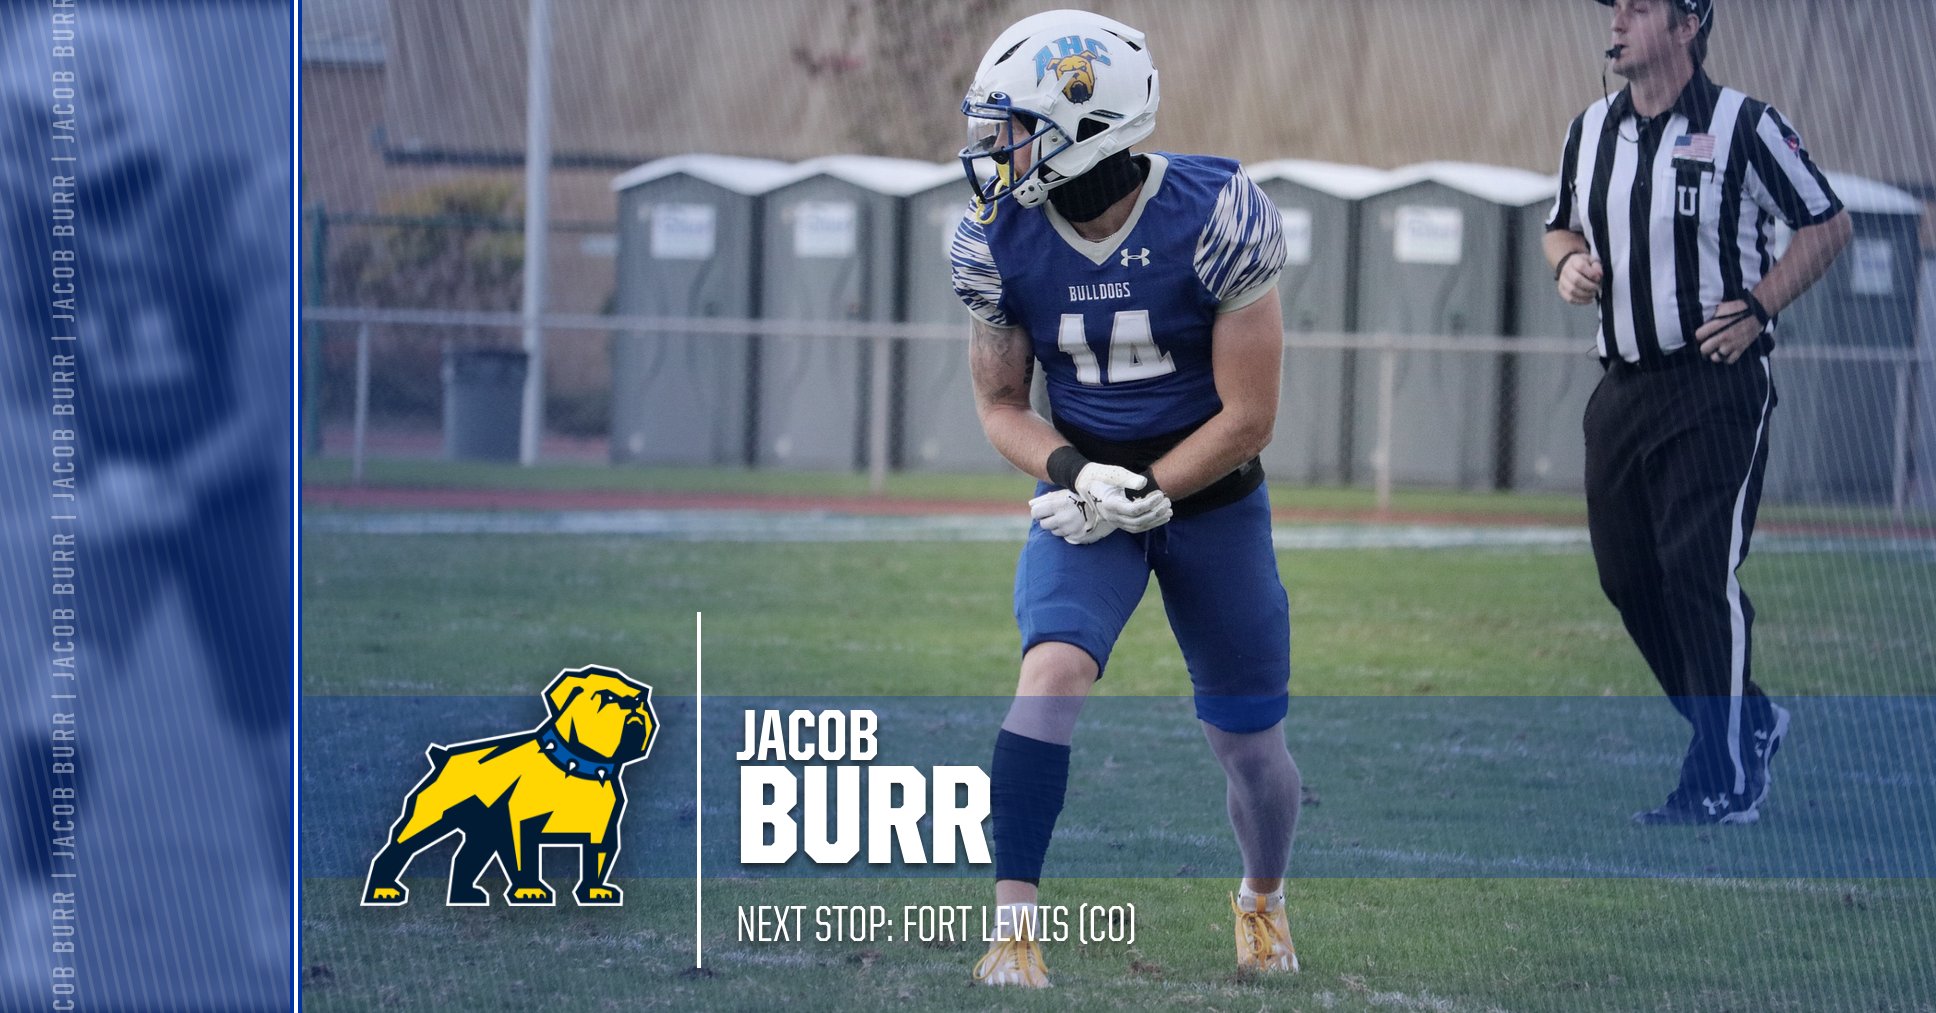 Football's Jacob Burr Heading to Fort Lewis